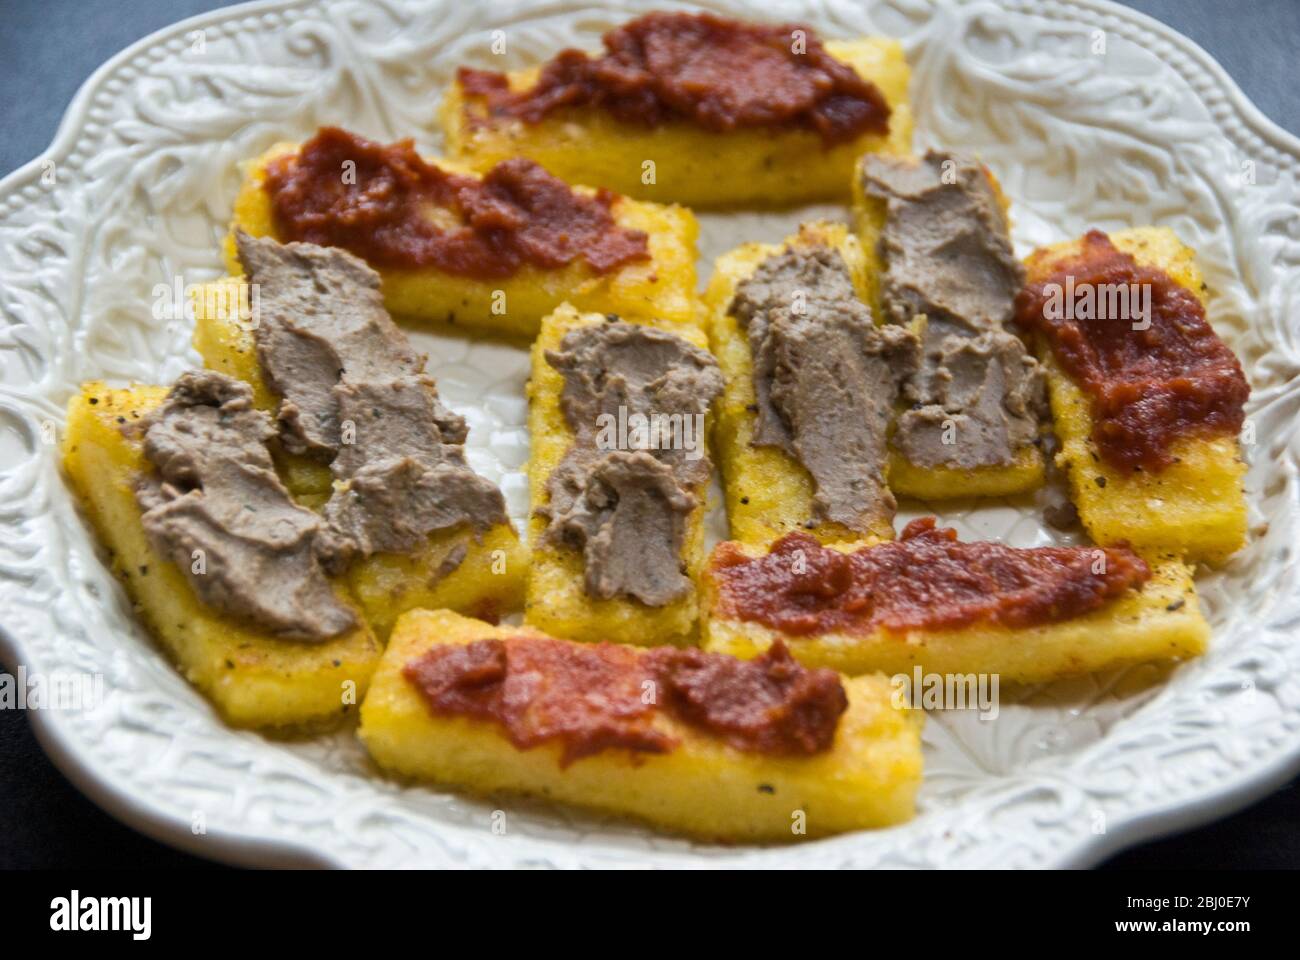 Plate of crostini made of polenta fried in olive oil spread with chicken liver pate or sundried tomato spread, served with drinks - Stock Photo